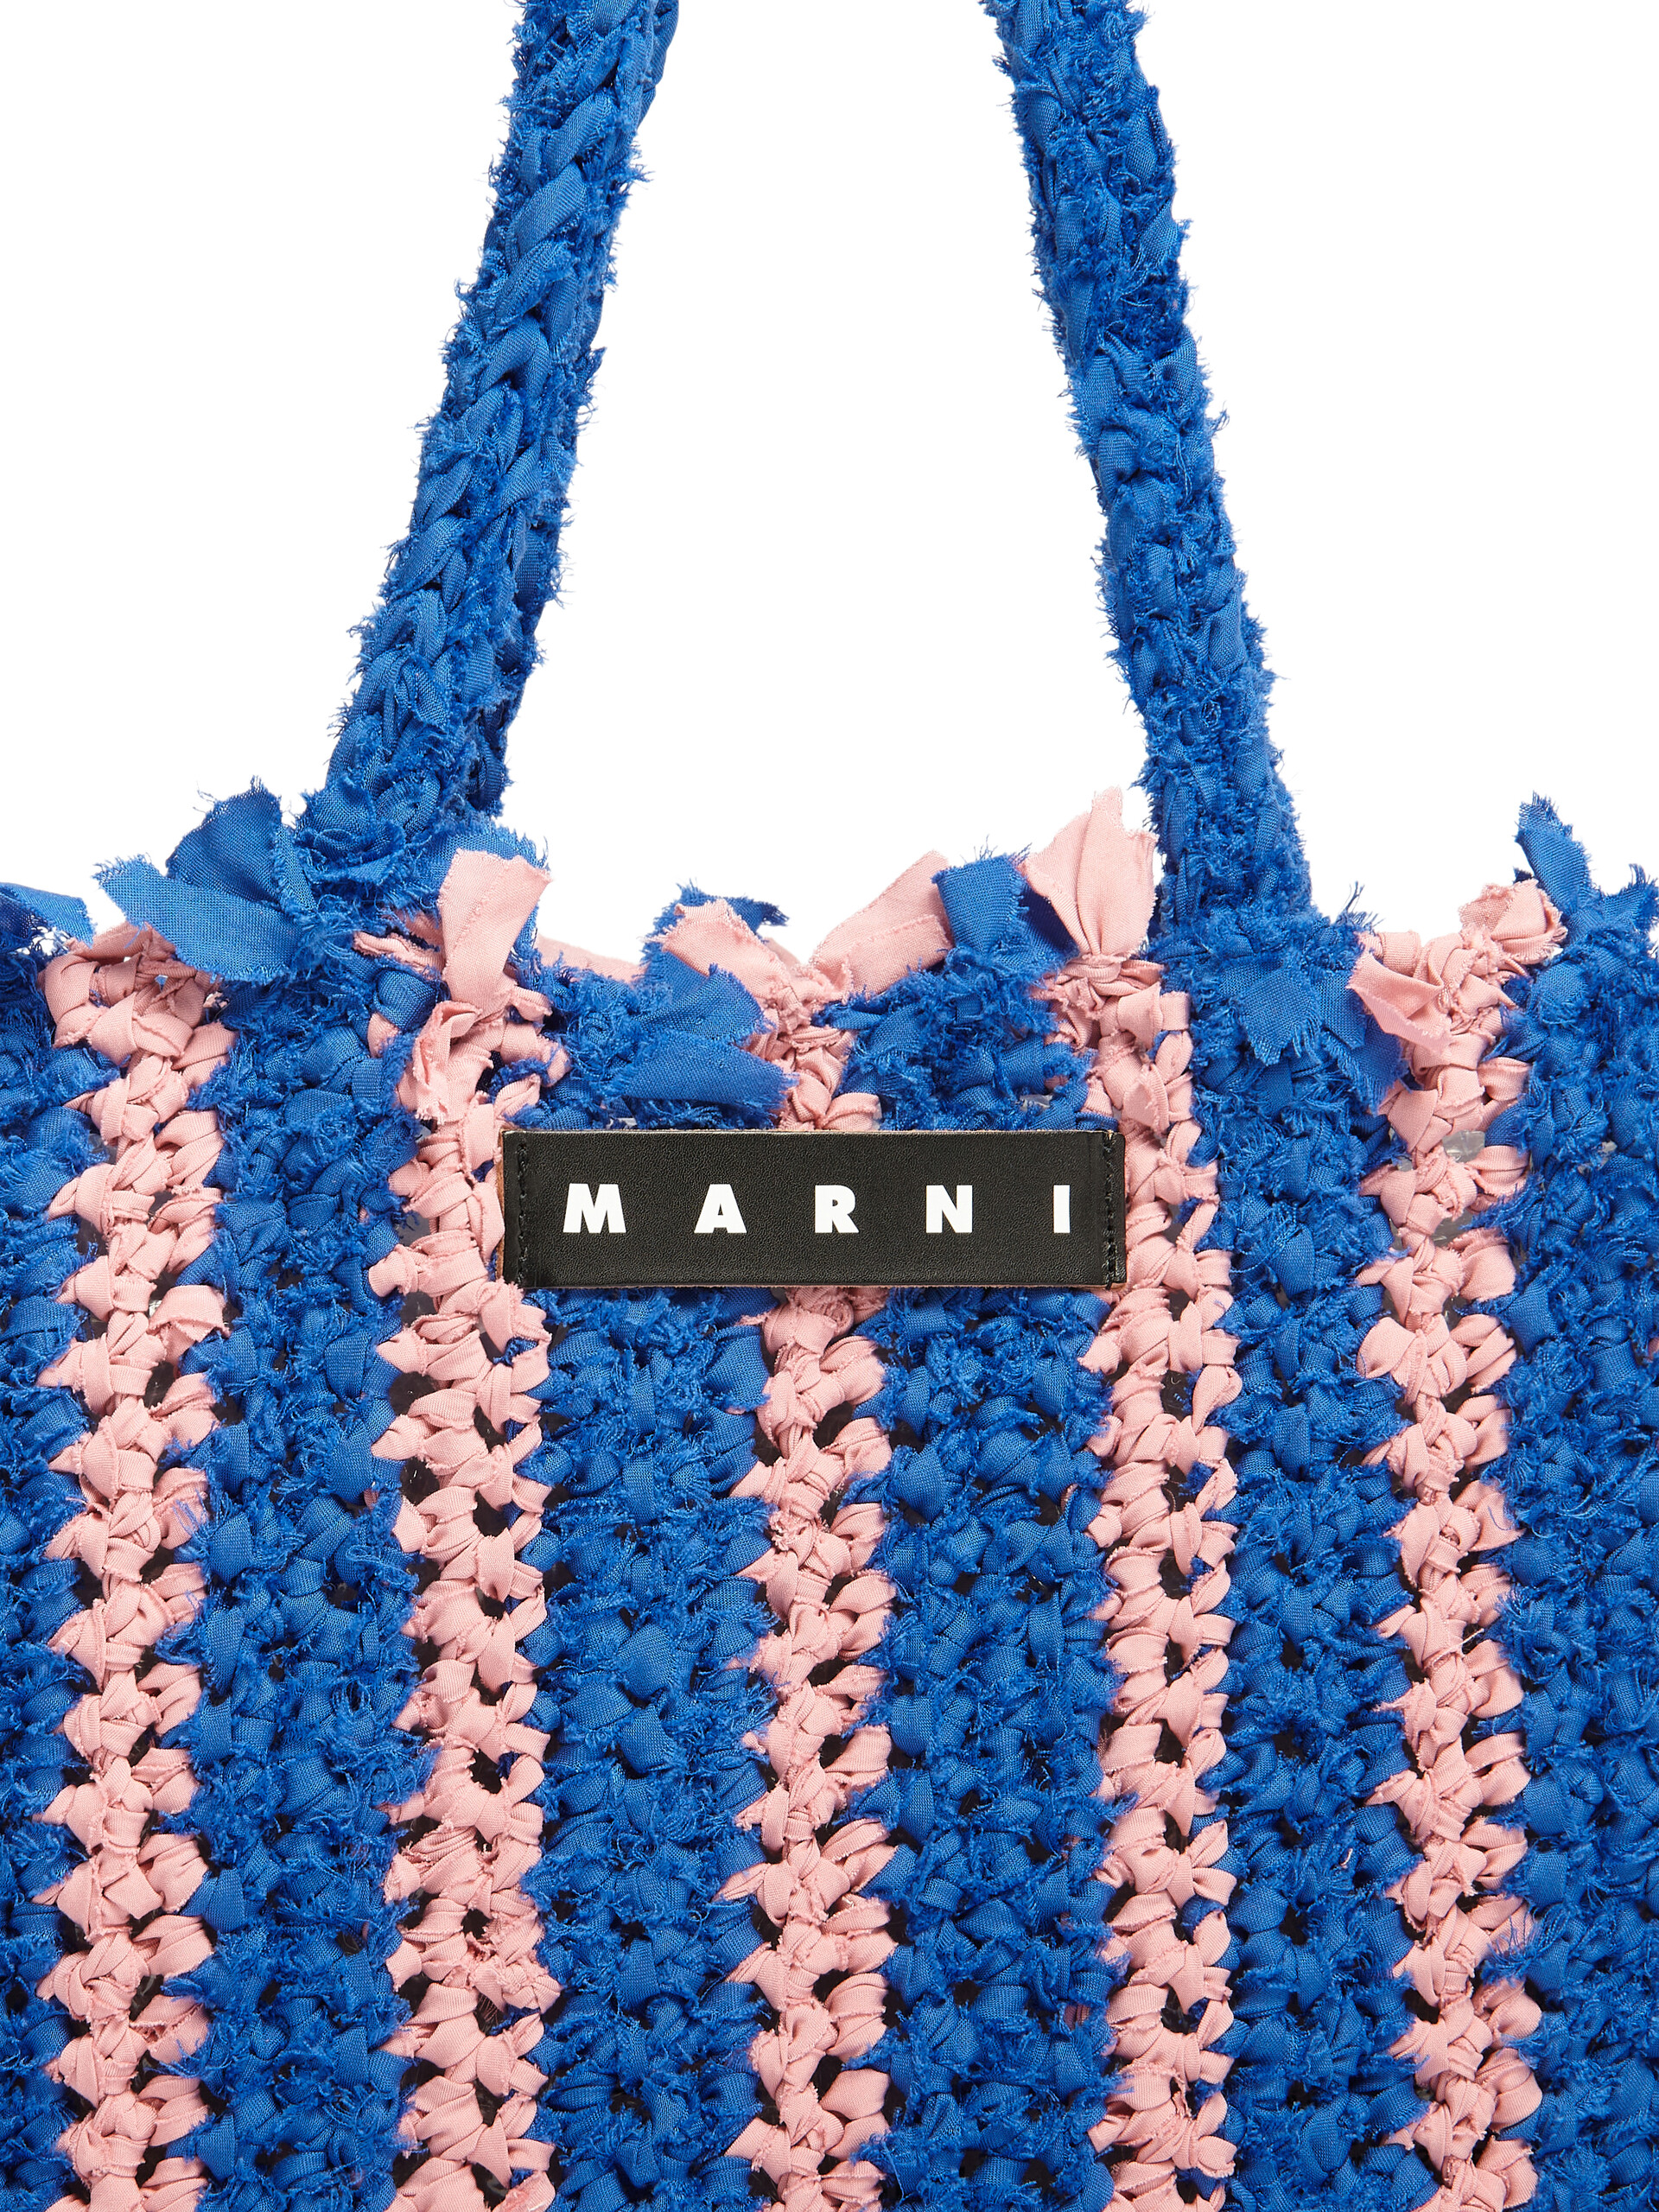 MARNI MARKET JERSEY bag in pink and blue cotton - Bags - Image 4